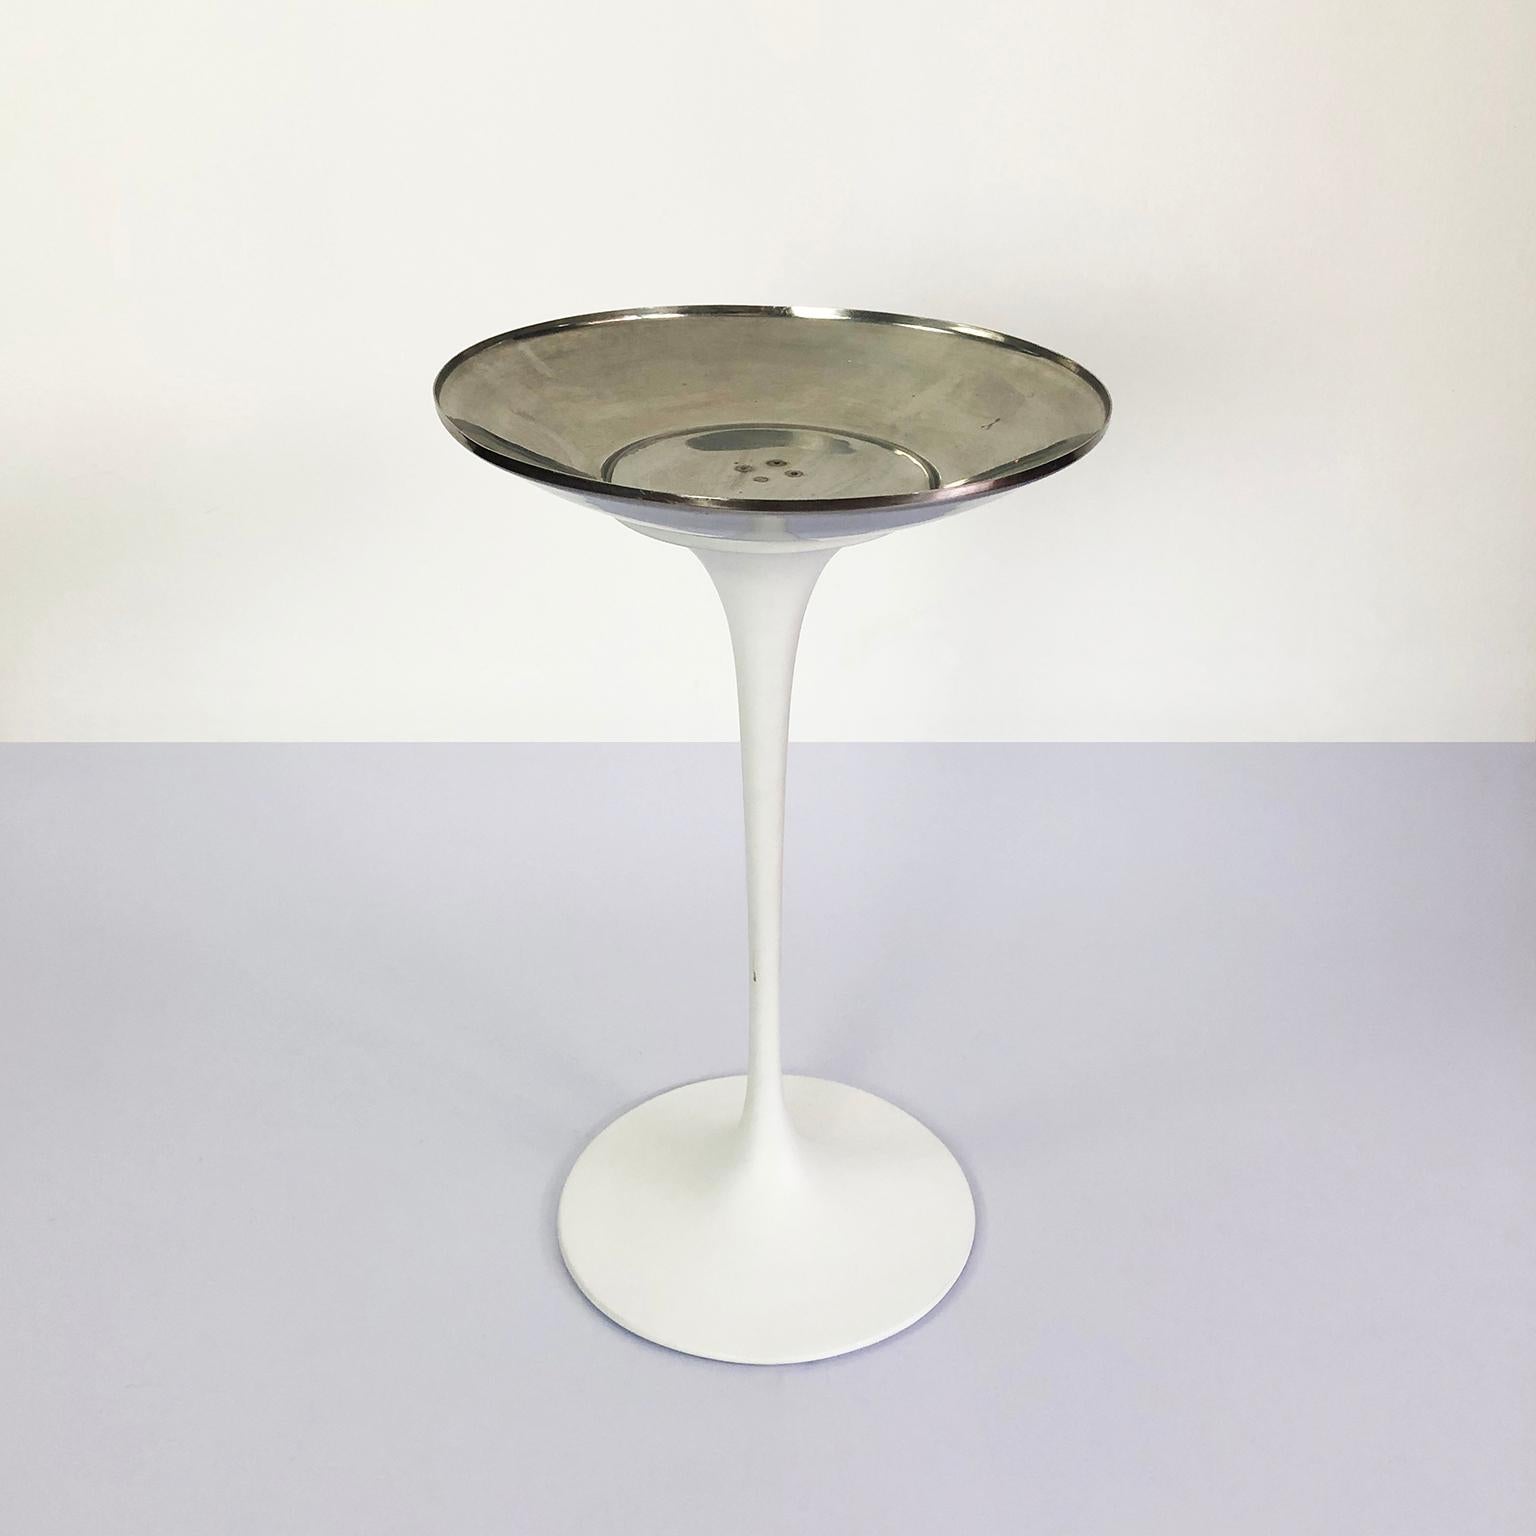 We offer this pedestal ash stand designed by Eero Saarinen for Knoll, circa 1960.